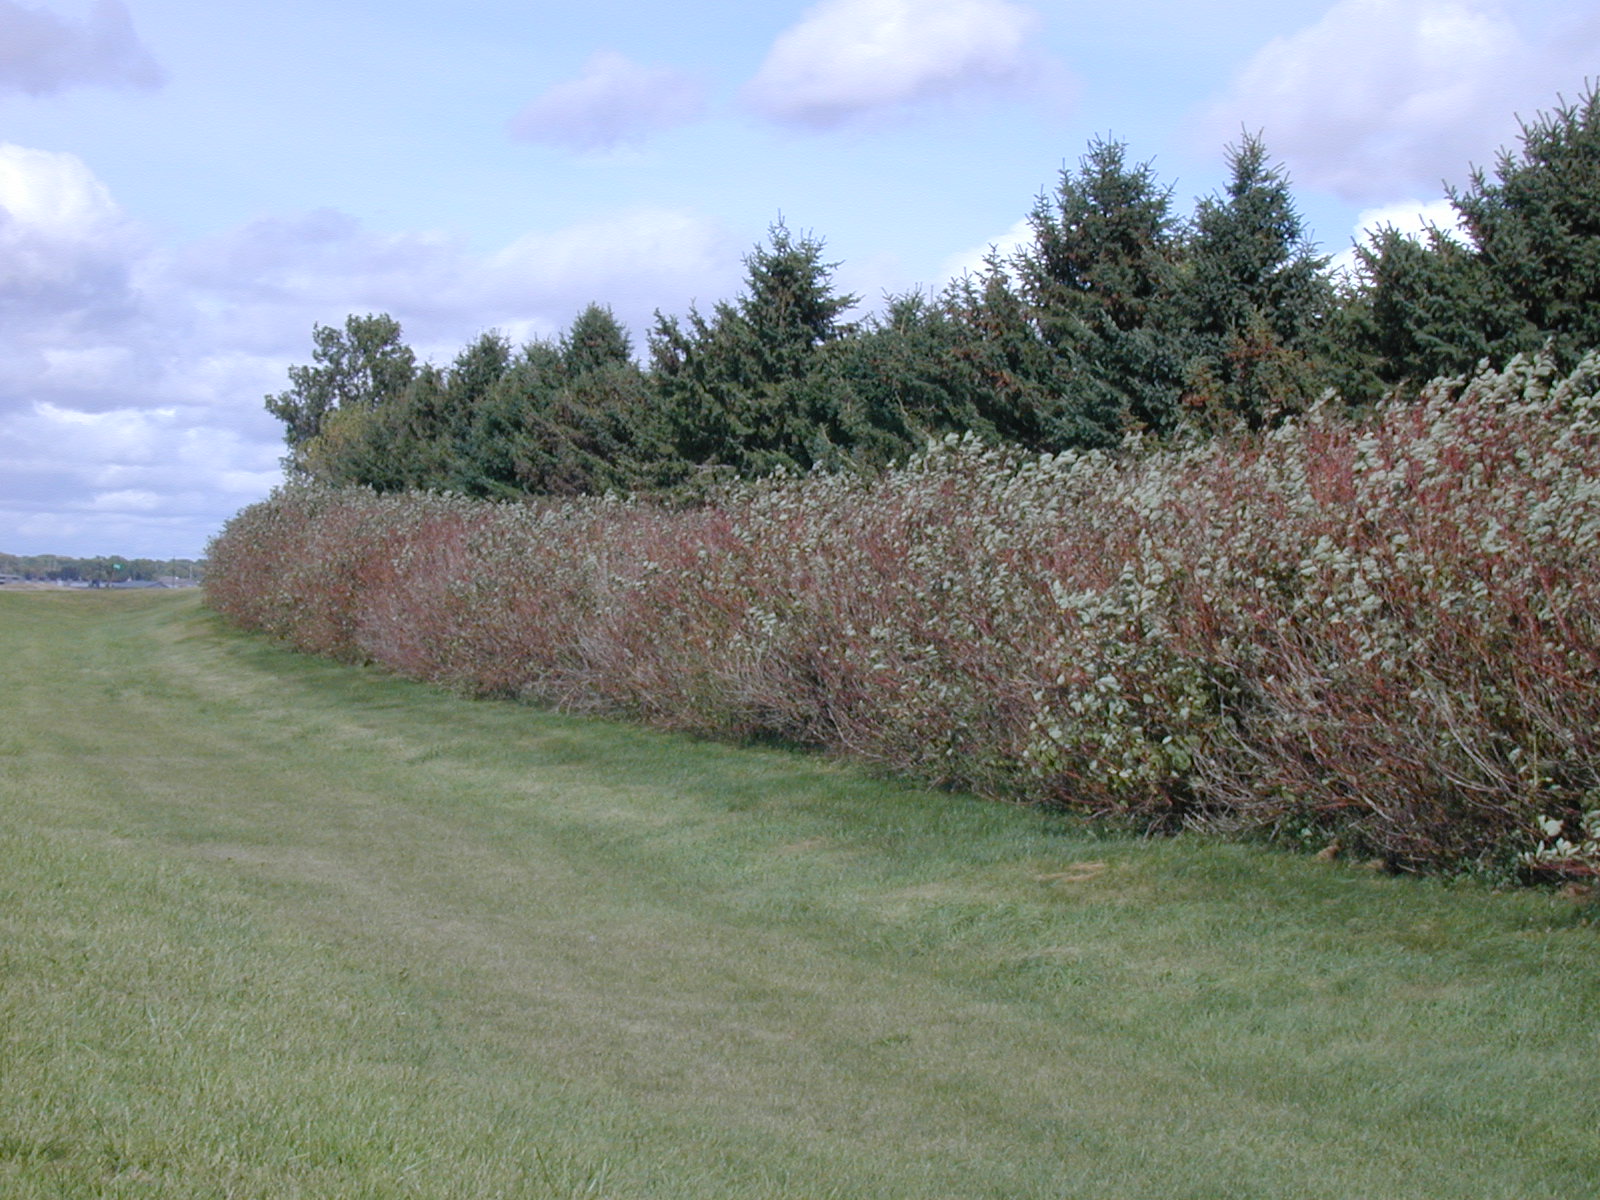 Open A multiple-row windbreak consisting of conifers and densely growing deciduous shrubs. University of Nebraska photo.